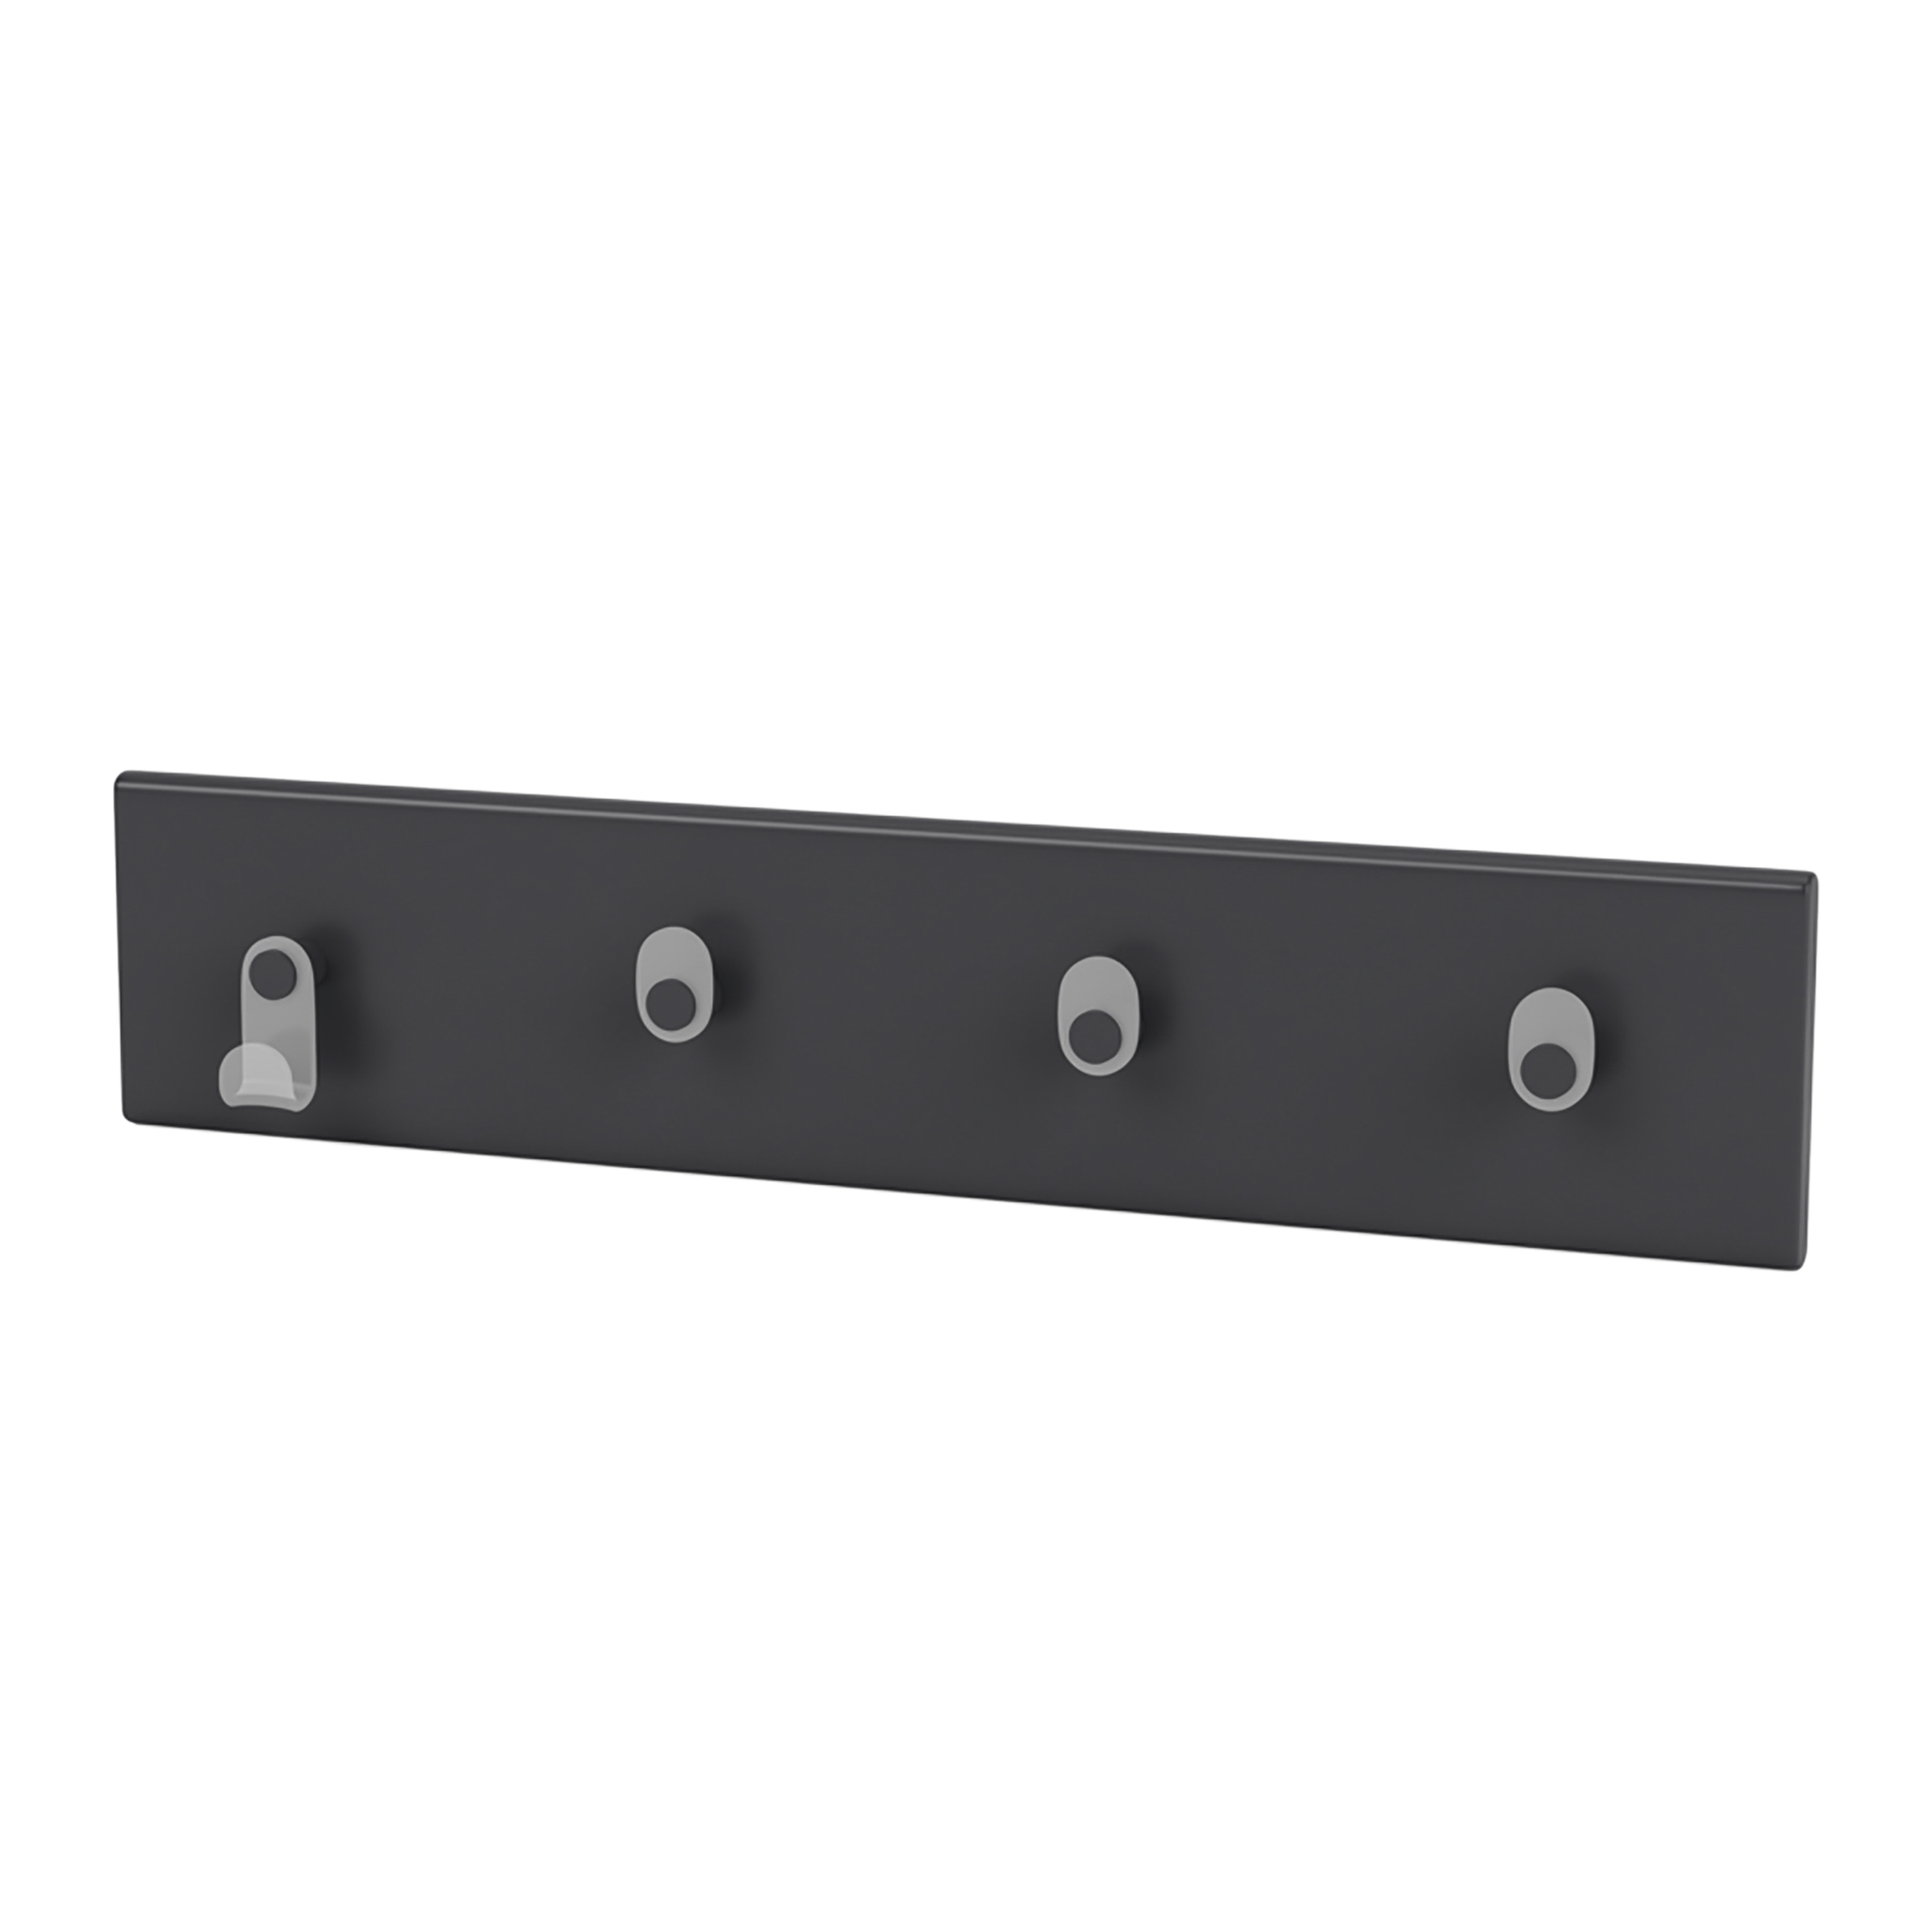 MONTANA // K812 - HOOK RAIL WITH FOUR BUTTONS | 04 ANTHRACITE